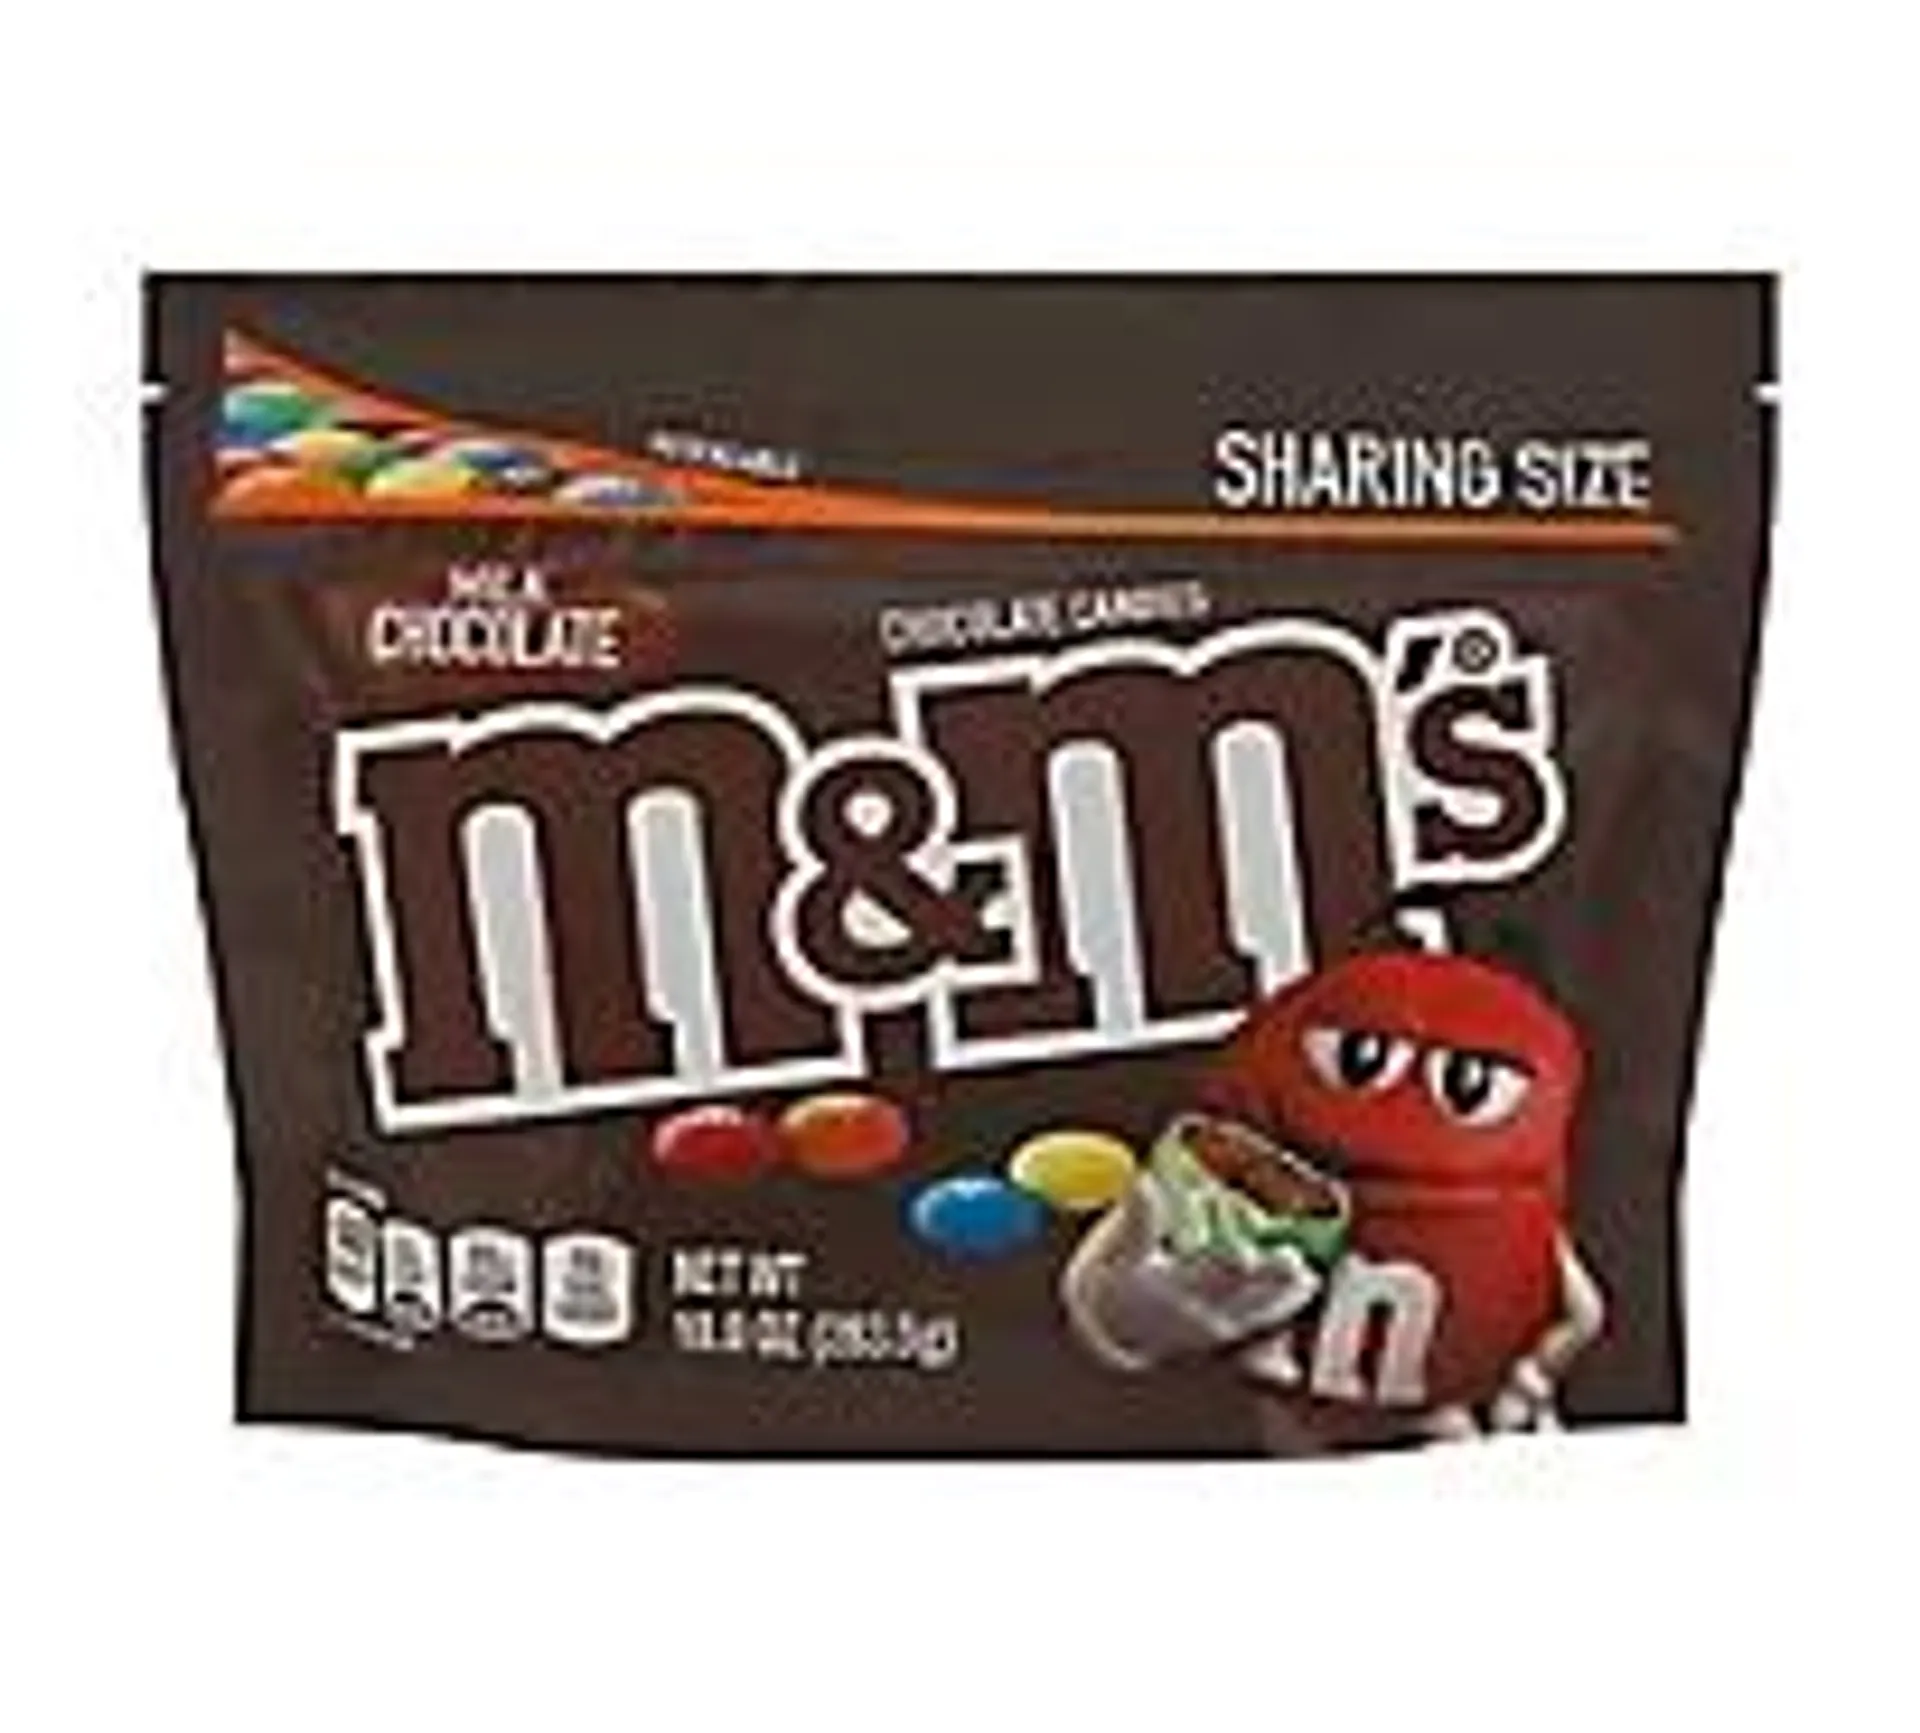 M&Ms Milk Chocolate Candy Sharing Size Bag - 10 Oz